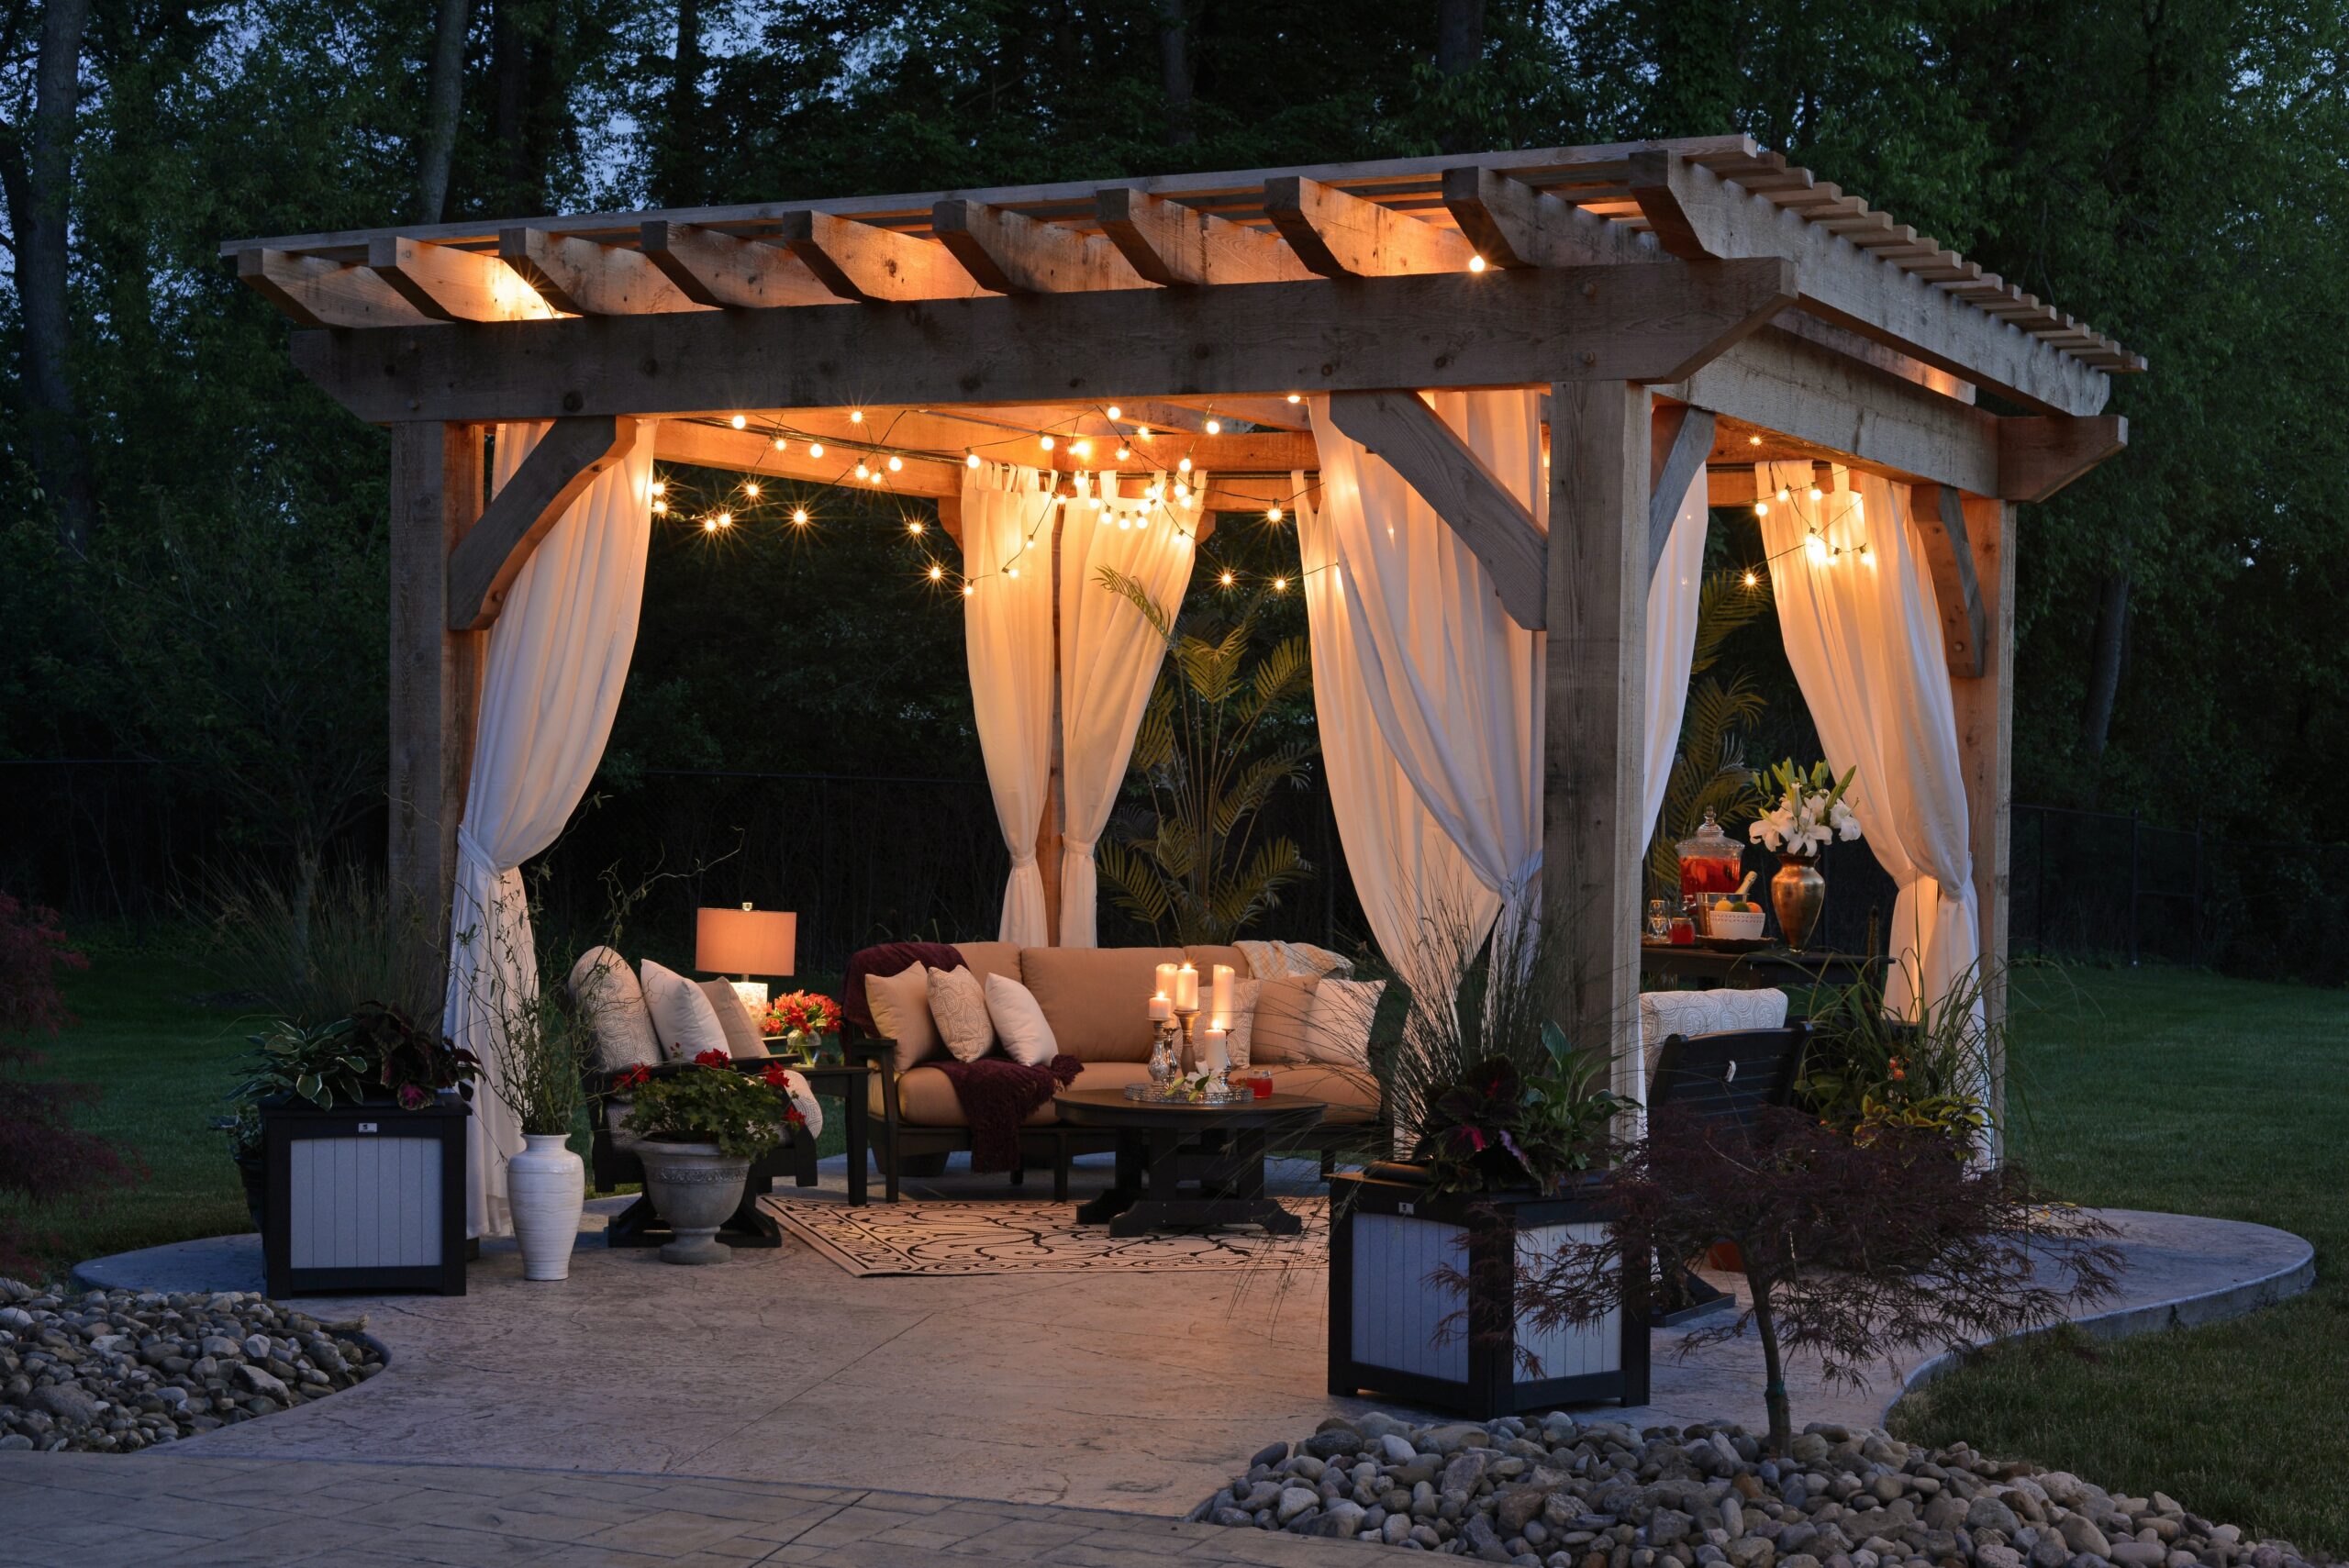 Revamp Your Outdoor Living Experience for a Stunning and Functional Backyard Sanctuary